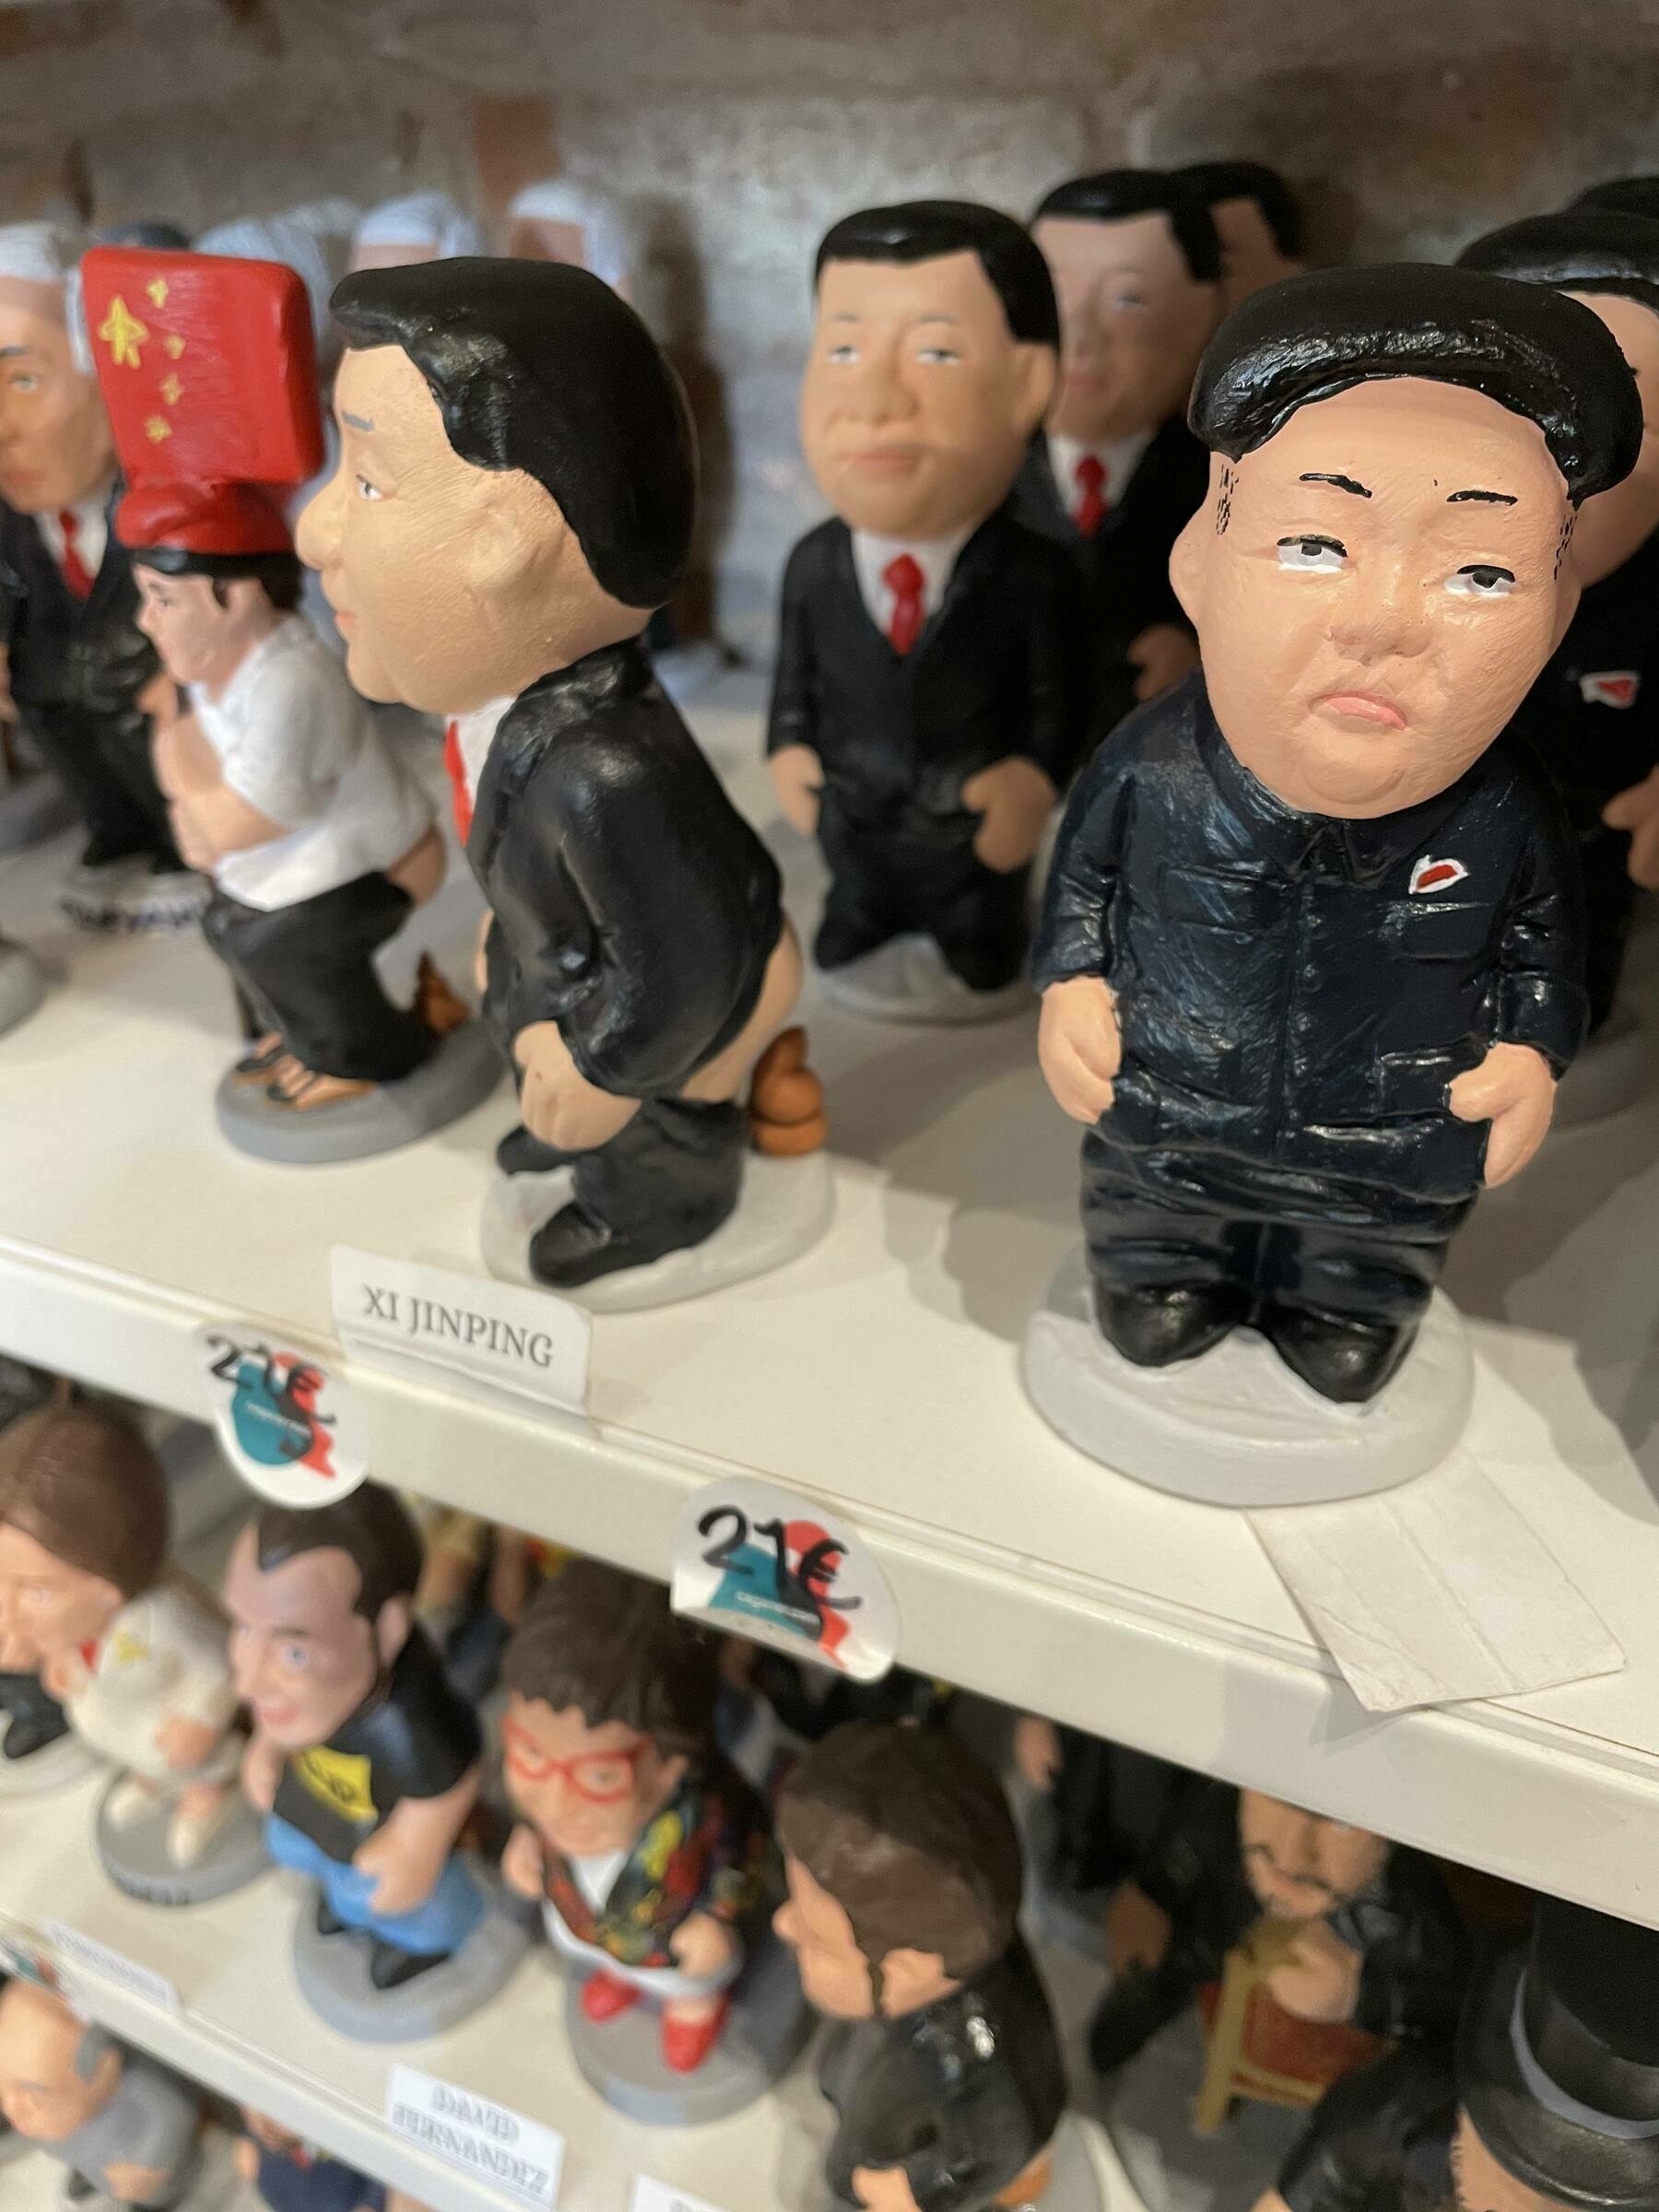 Wacky figurines of famous people with their pants down, poop under their exposed bottoms. These are sold in a shop in Barcelona for €21